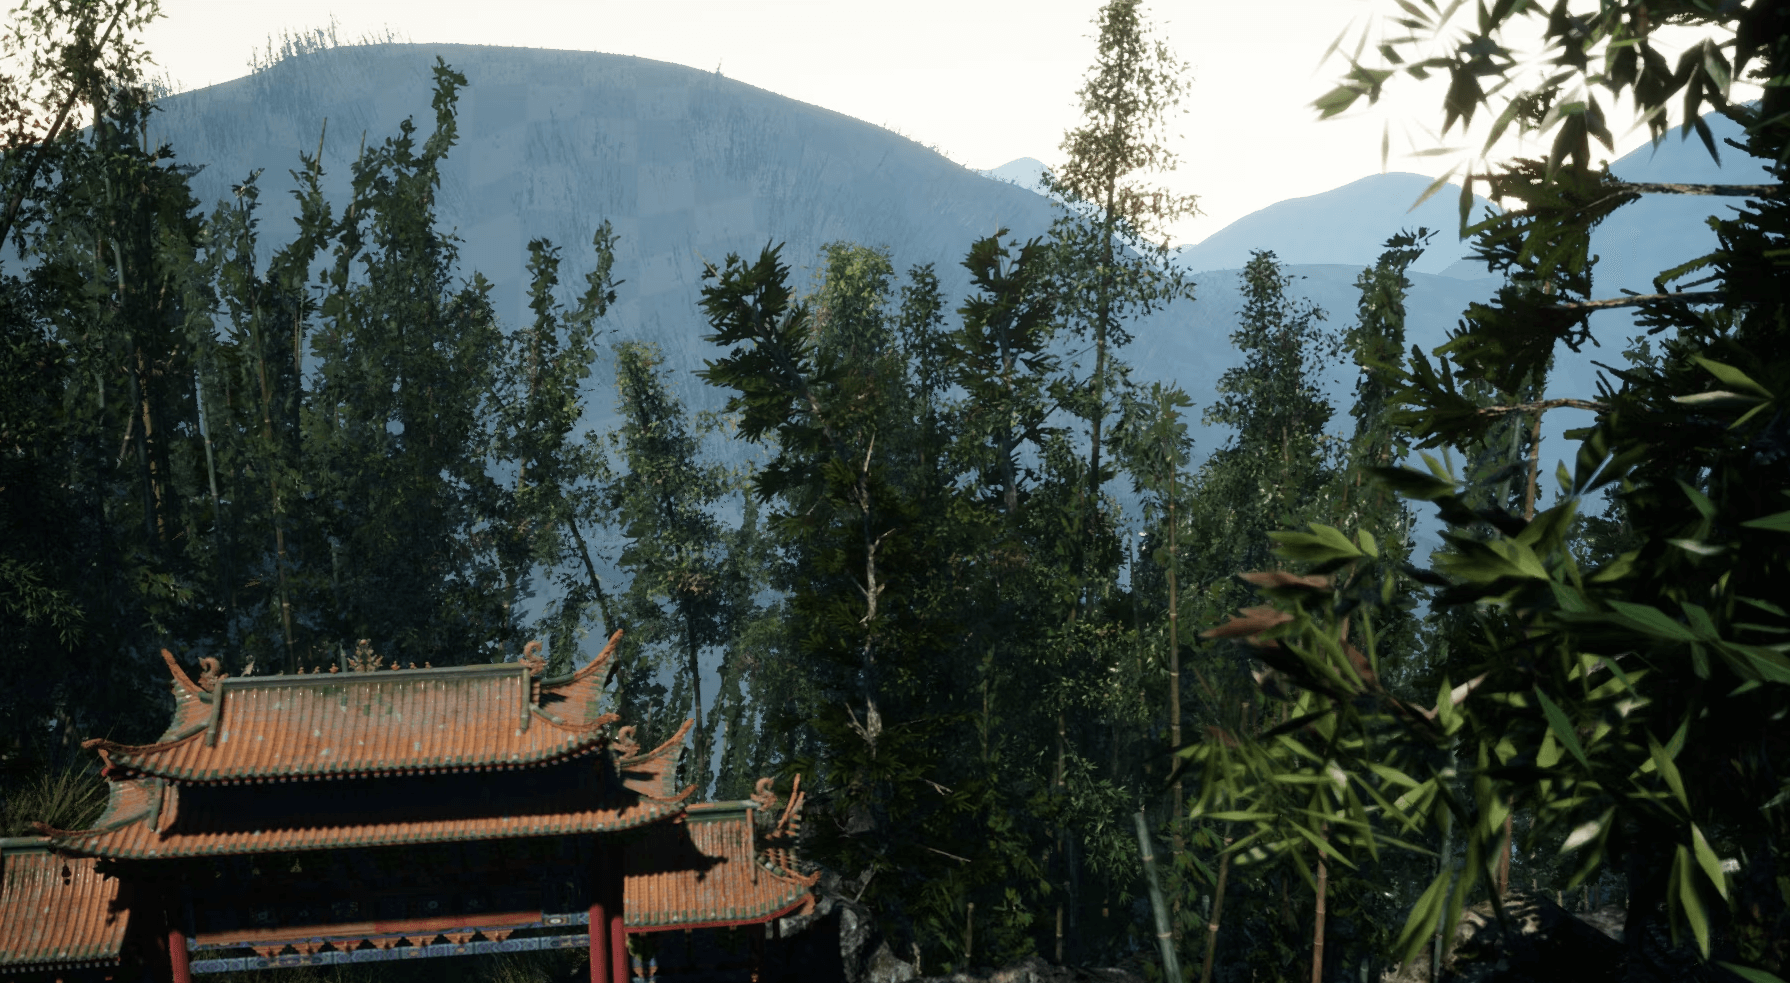 【UE4/5】中国风山门-Oriental ancient pictures,templeArchwayMountain gate